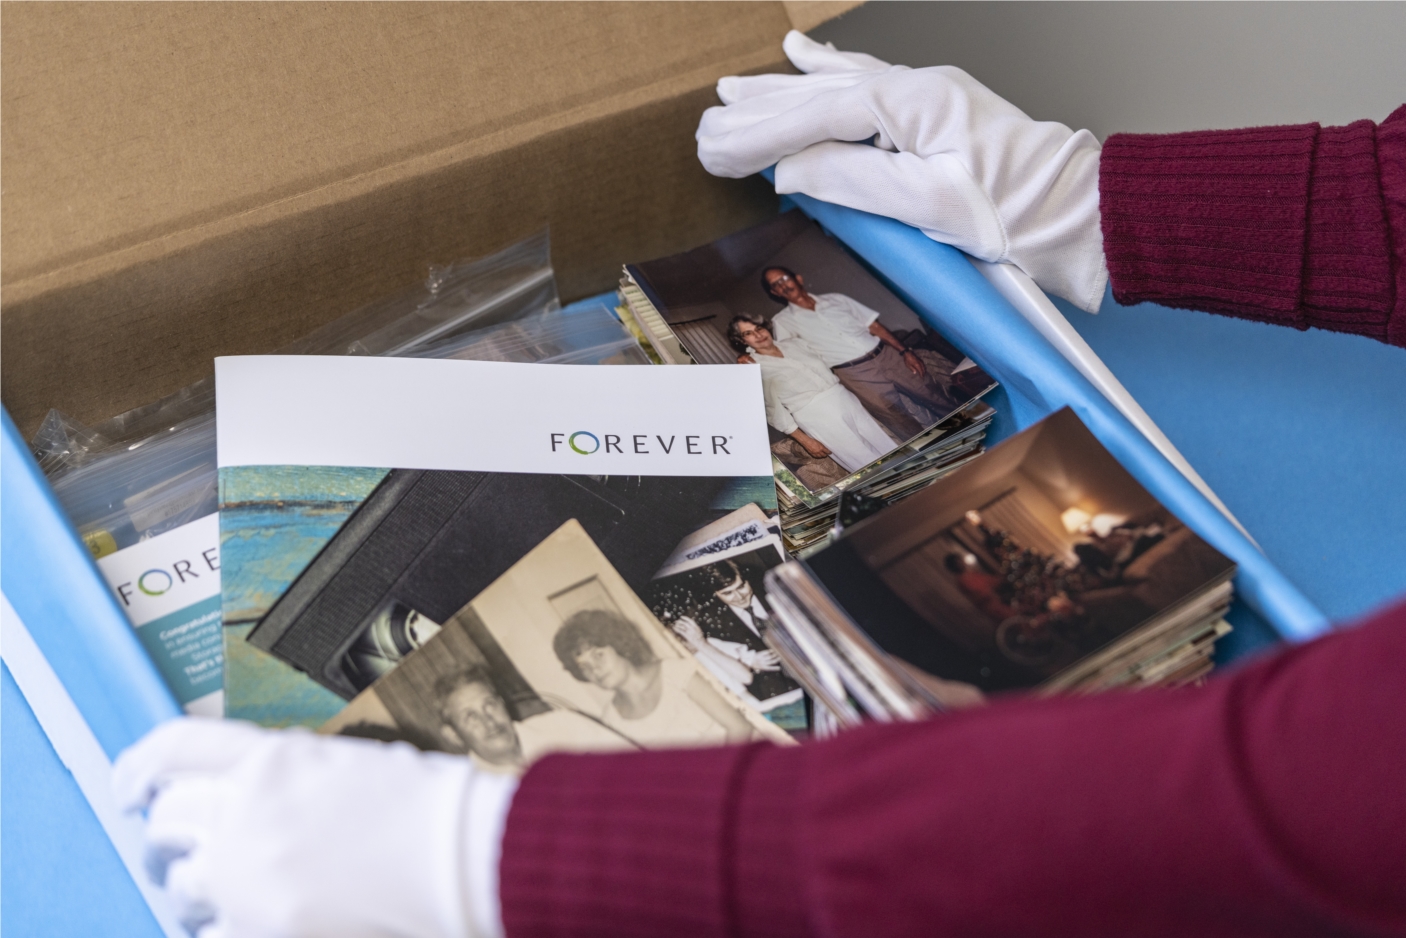 Our Digital Conversion Center offers top of the line services in the digitization of your memories.